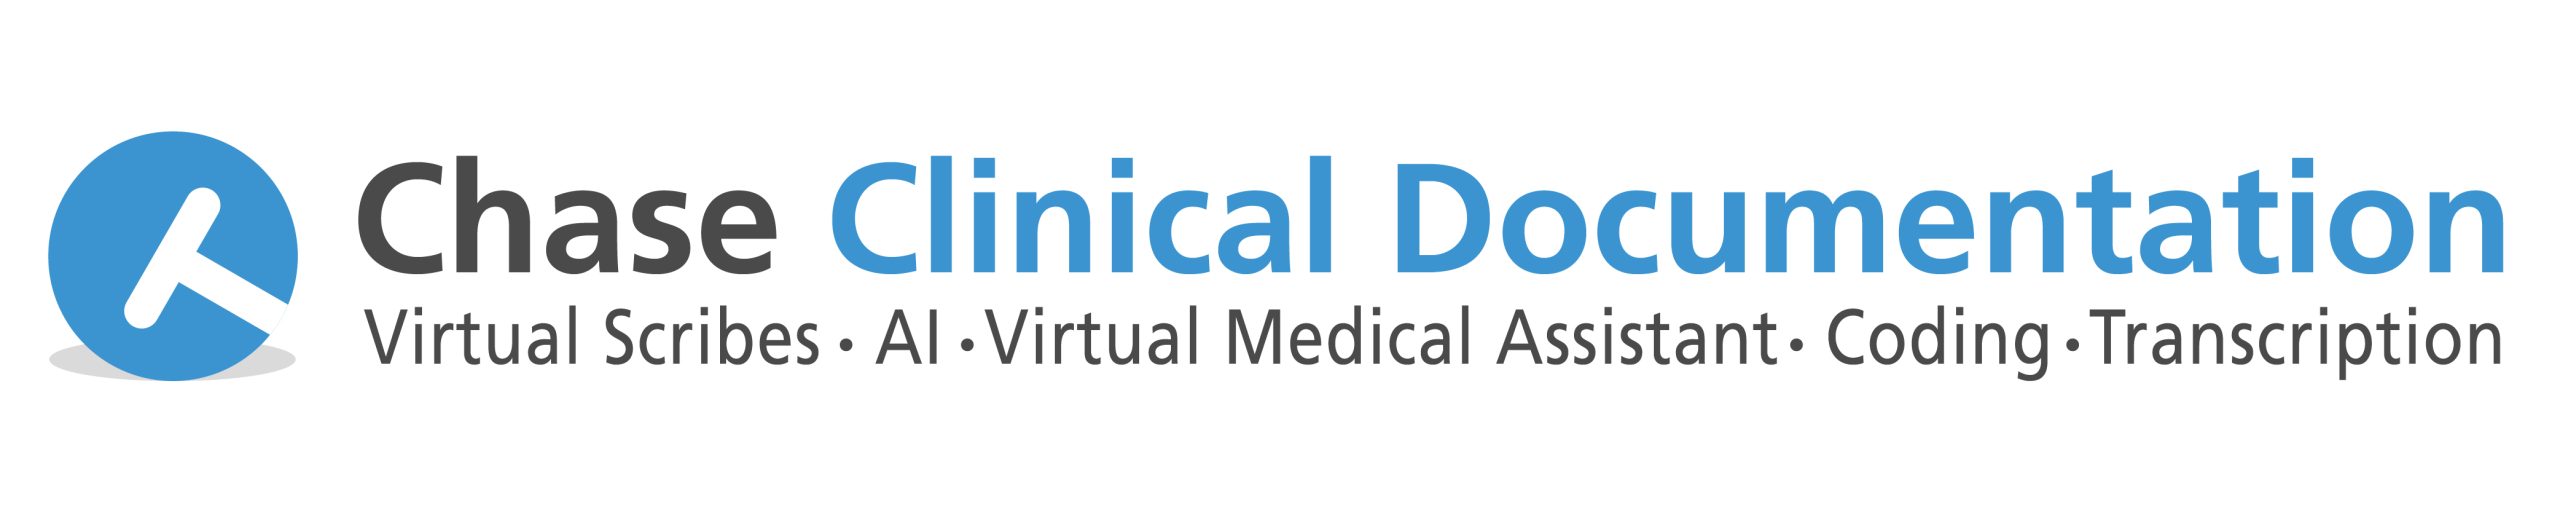  Chase Clinical Documentation